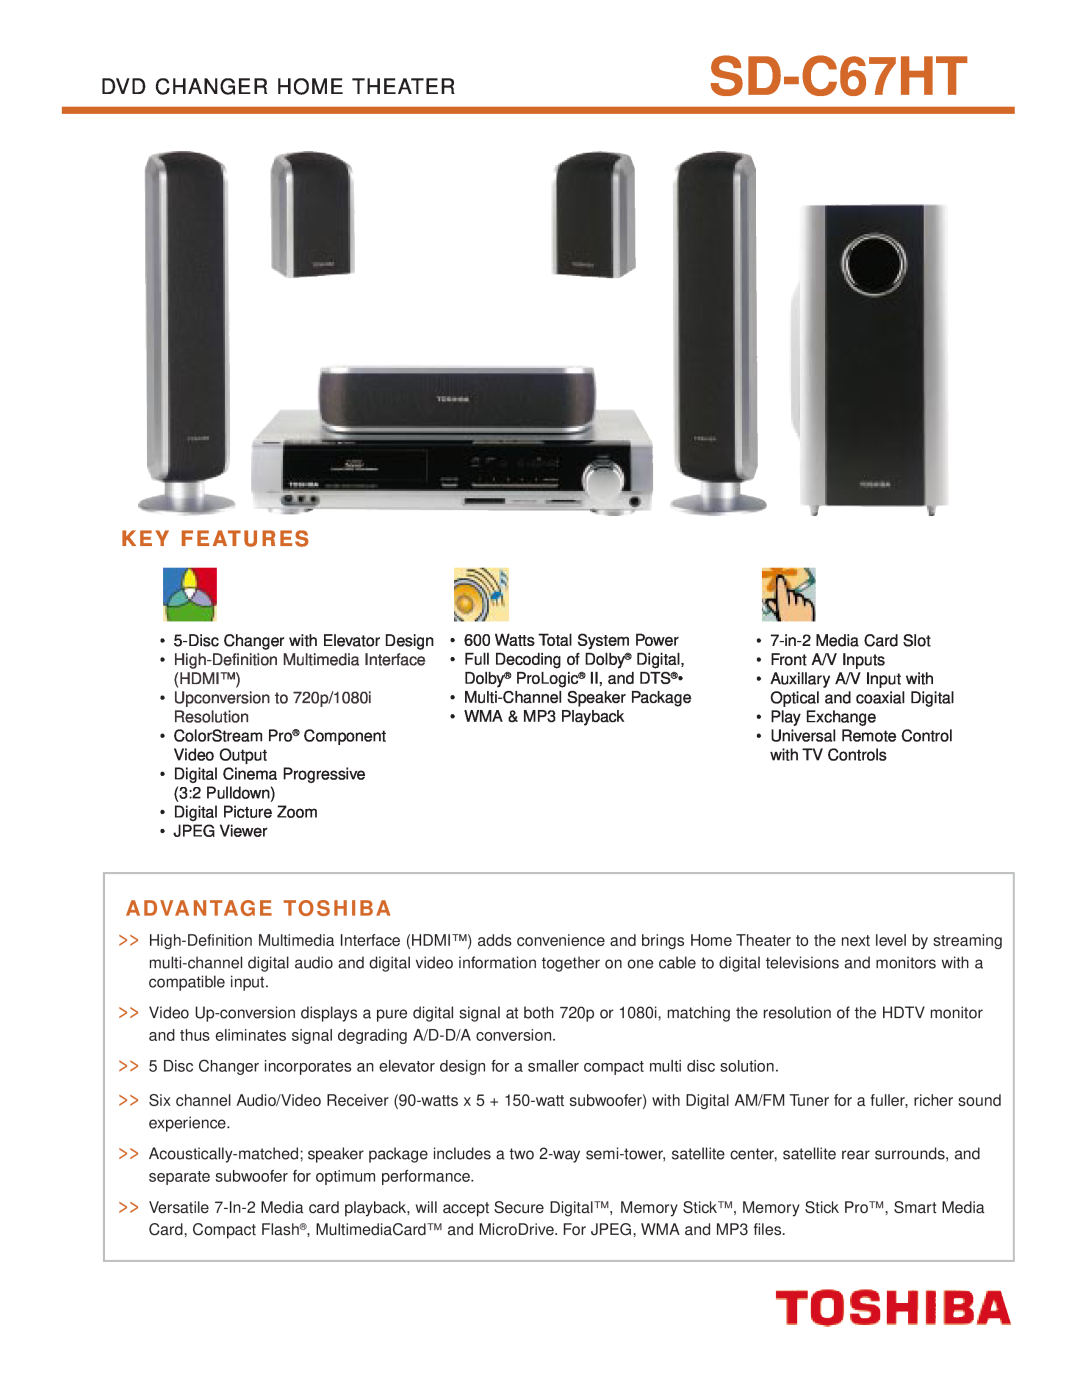 Toshiba SD-C67HT manual K E Y F E At U R E S, A Dva N Tag E To S H I Ba, Dvd Changer Home Theater 